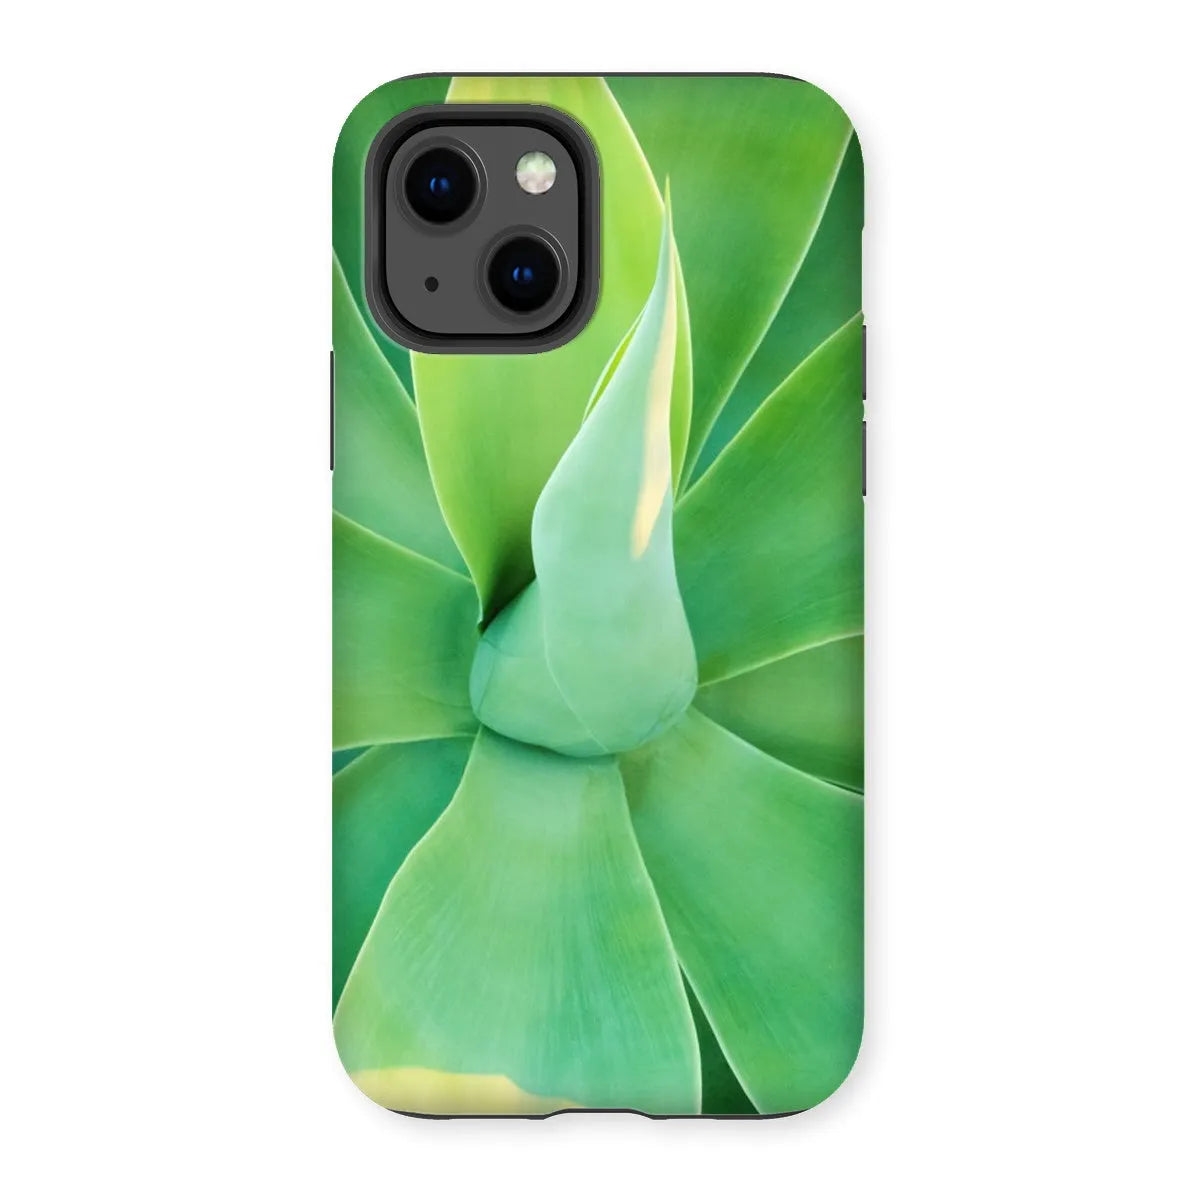 In Bloom Too Tough Phone Case - Iphone 13 / Matte - Mobile Phone Cases - Aesthetic Art